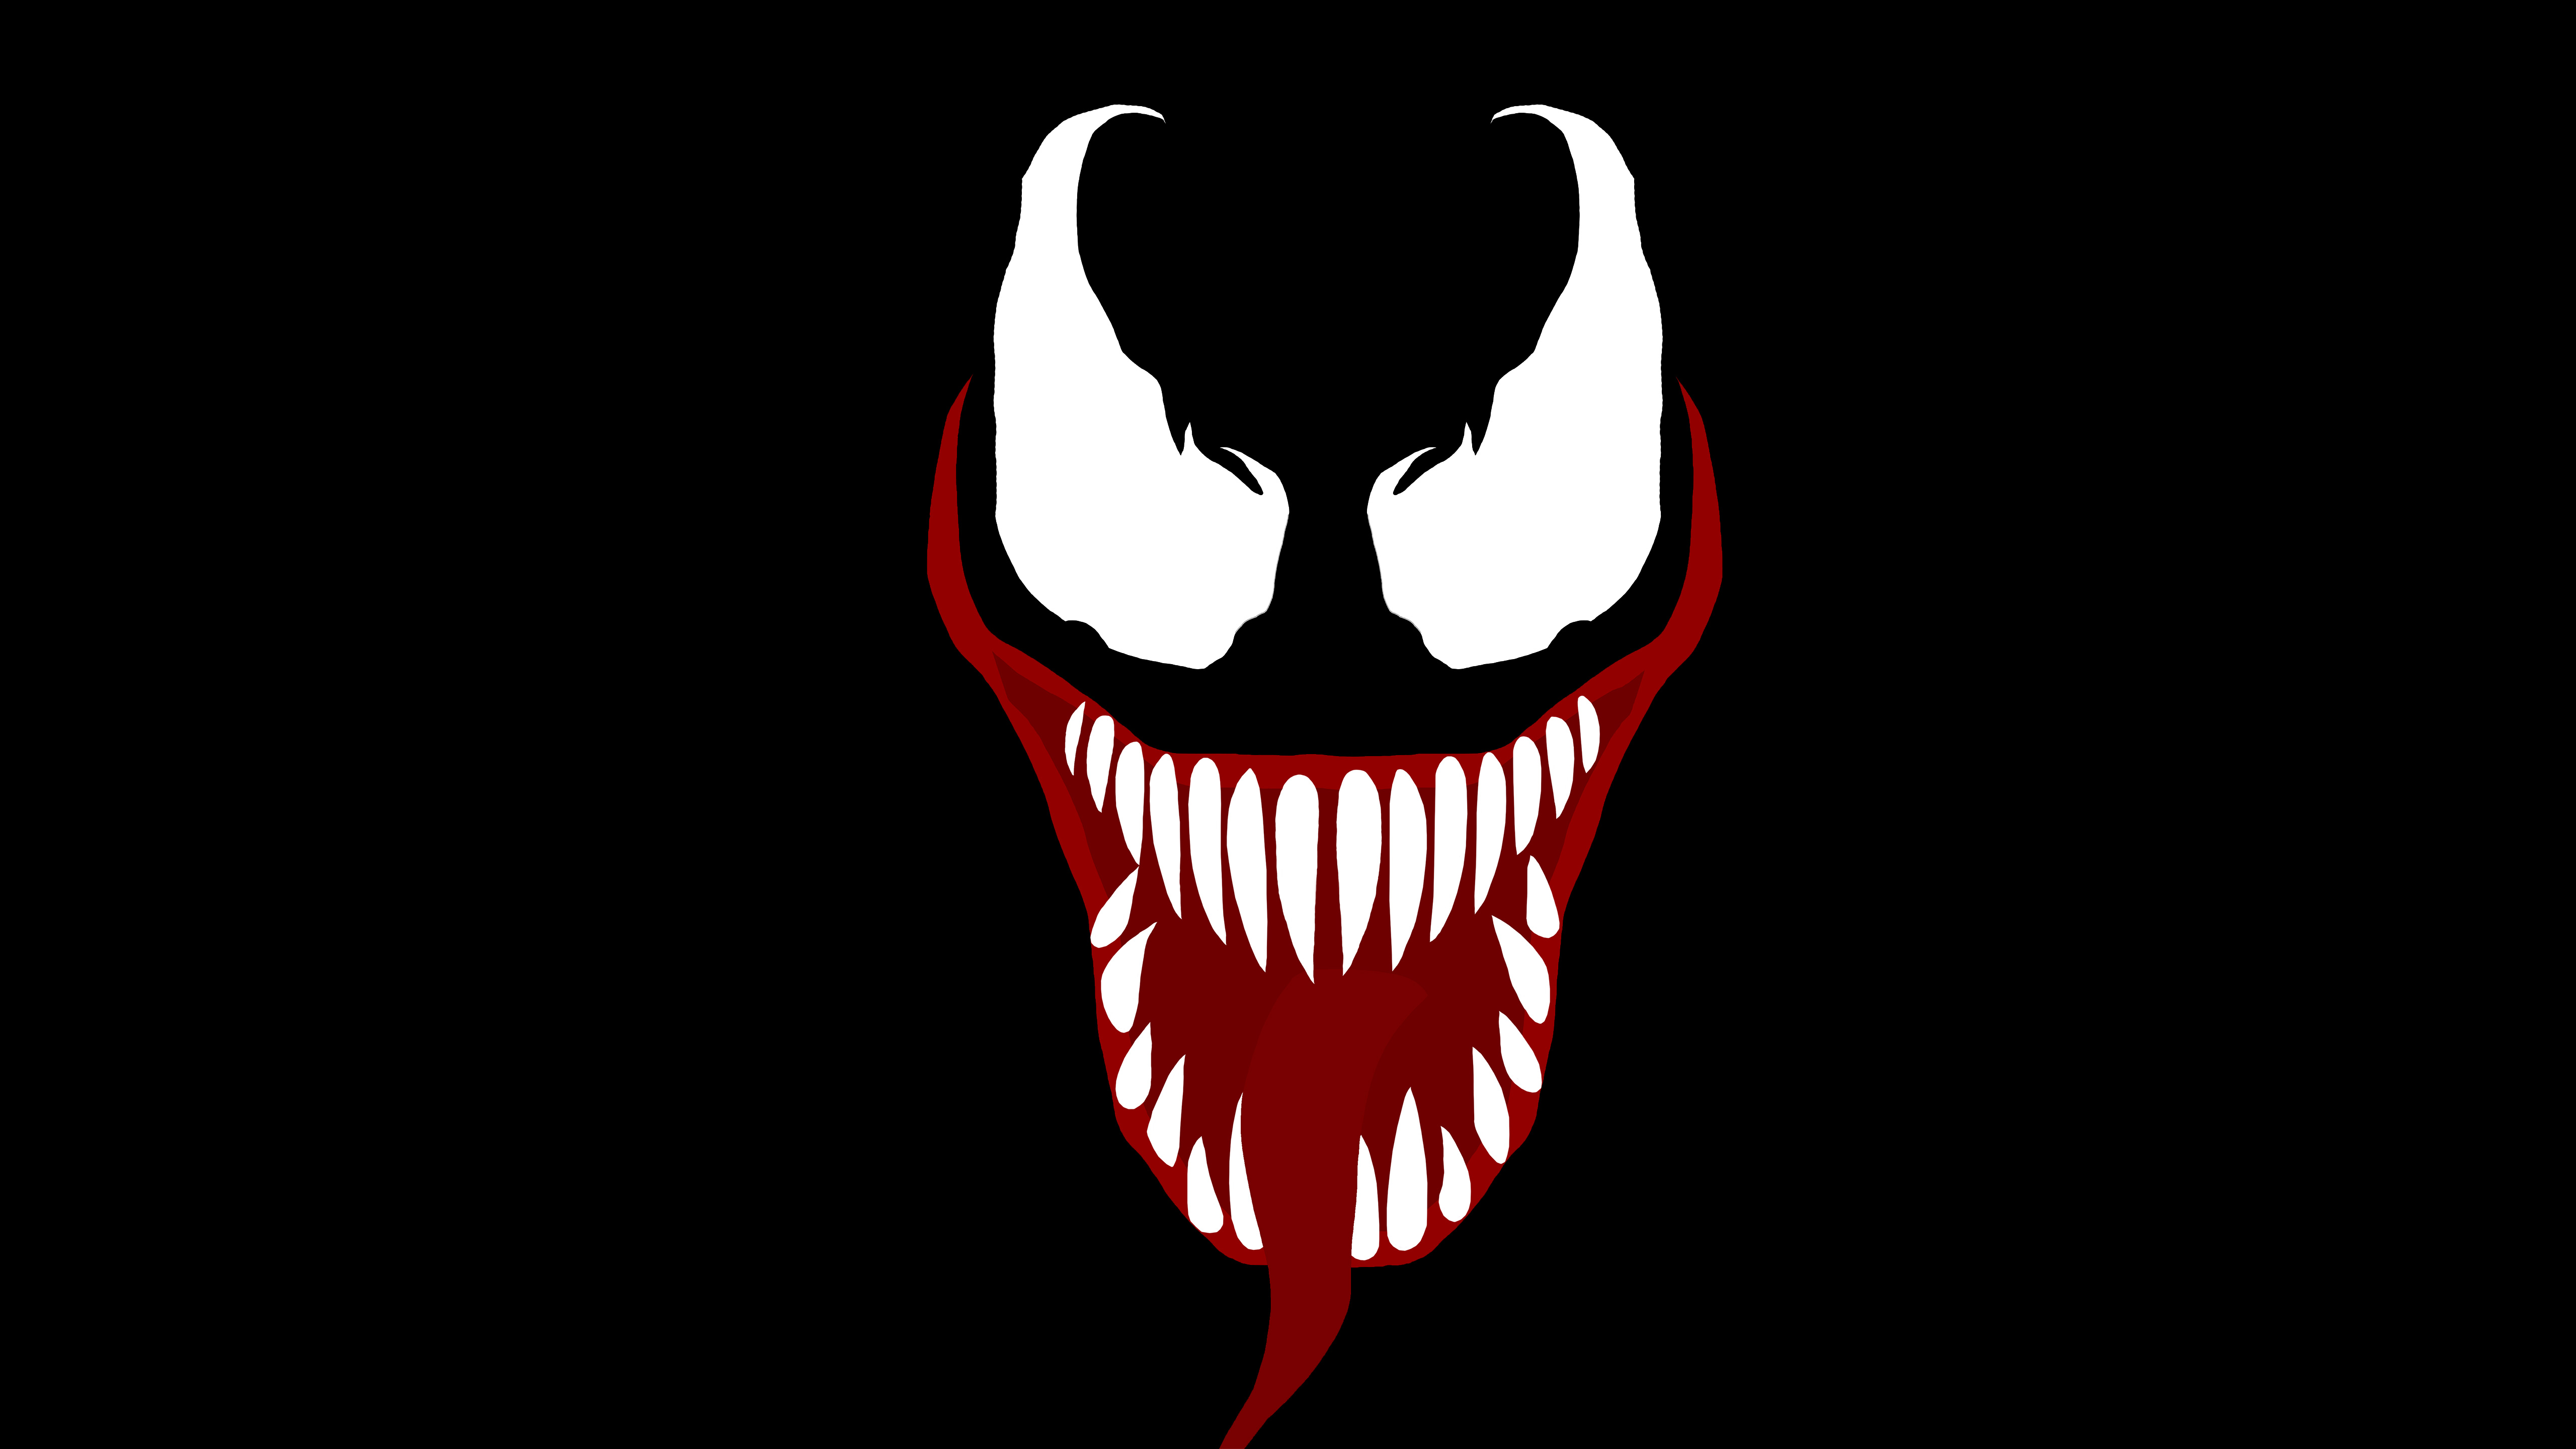 Venom Movie Face, Hd Movies, 4k Wallpapers, Images, - Venom Face Wallpaper Hd - HD Wallpaper 